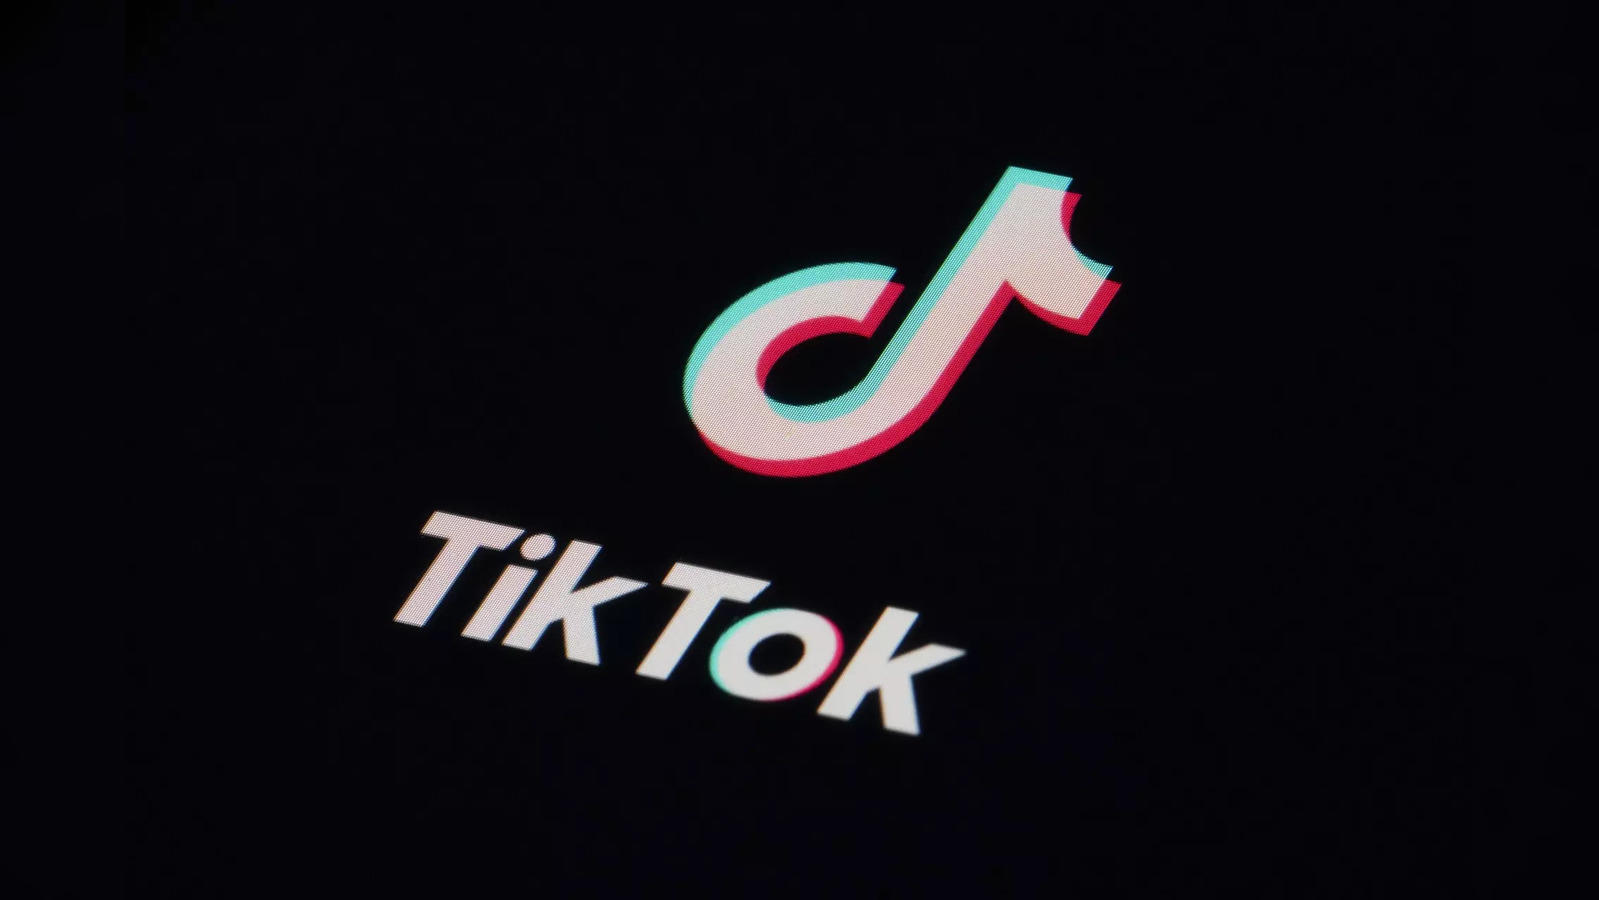 TikTok to take proactive steps to address issues in Malaysia